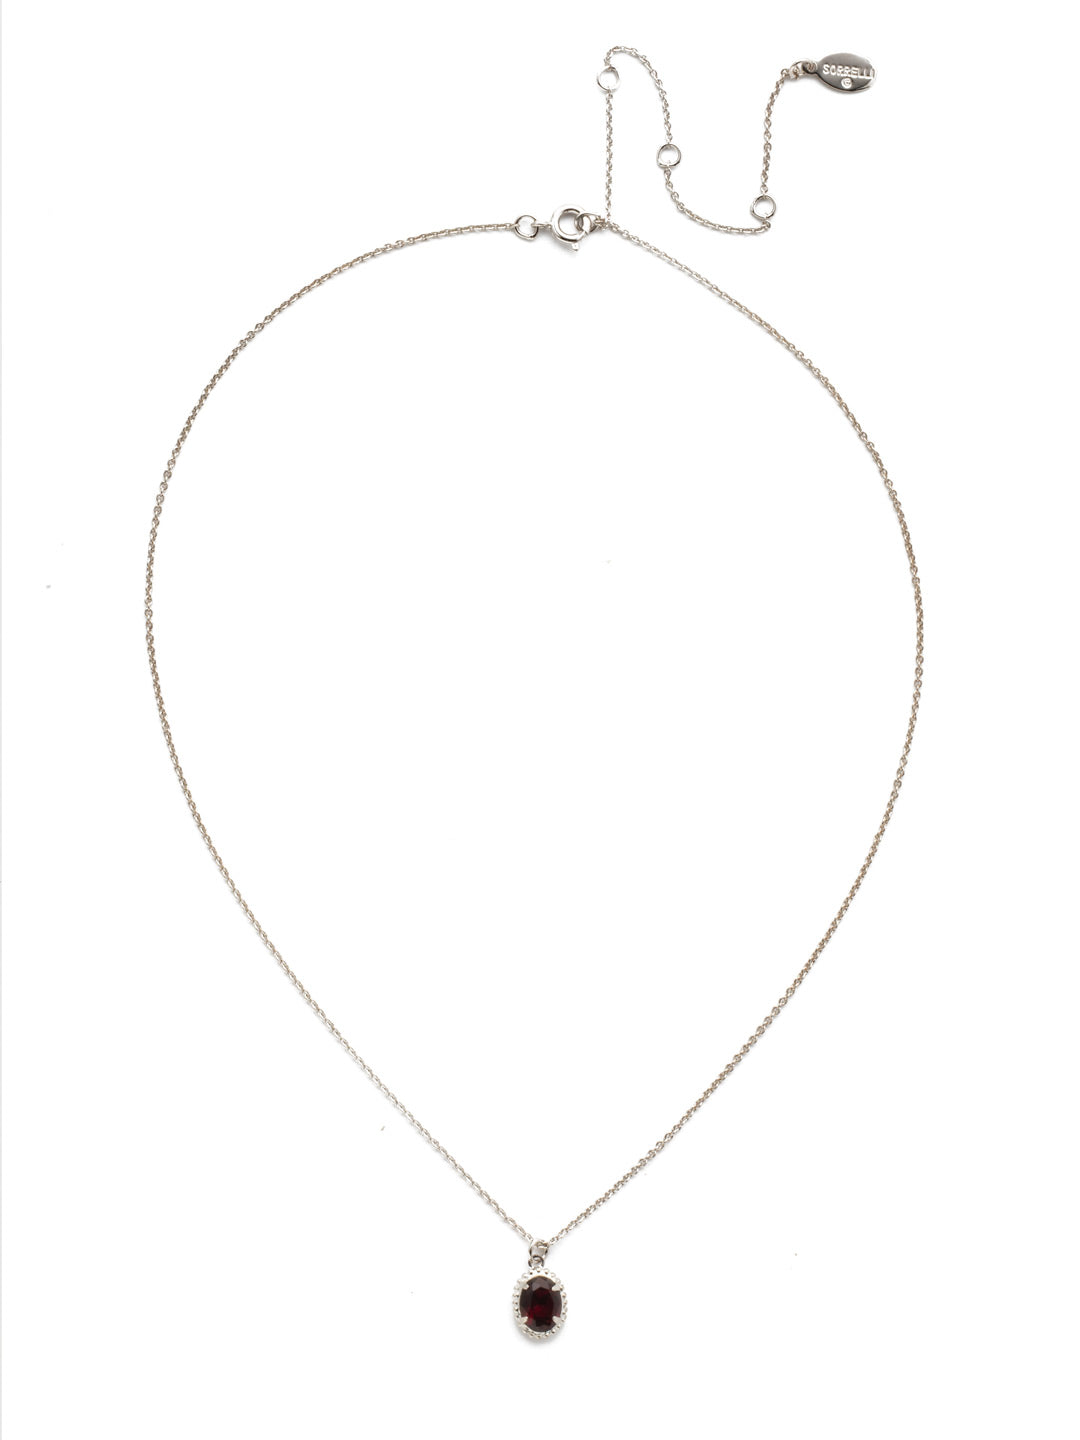 Maisie Pendant Necklace - NEF49RHBUR - <p>This is the perfect day-to-night sparkling tiny pendant necklace that has an adjustable chain to fit your neckline. From Sorrelli's Burgundy collection in our Palladium Silver-tone finish.</p>